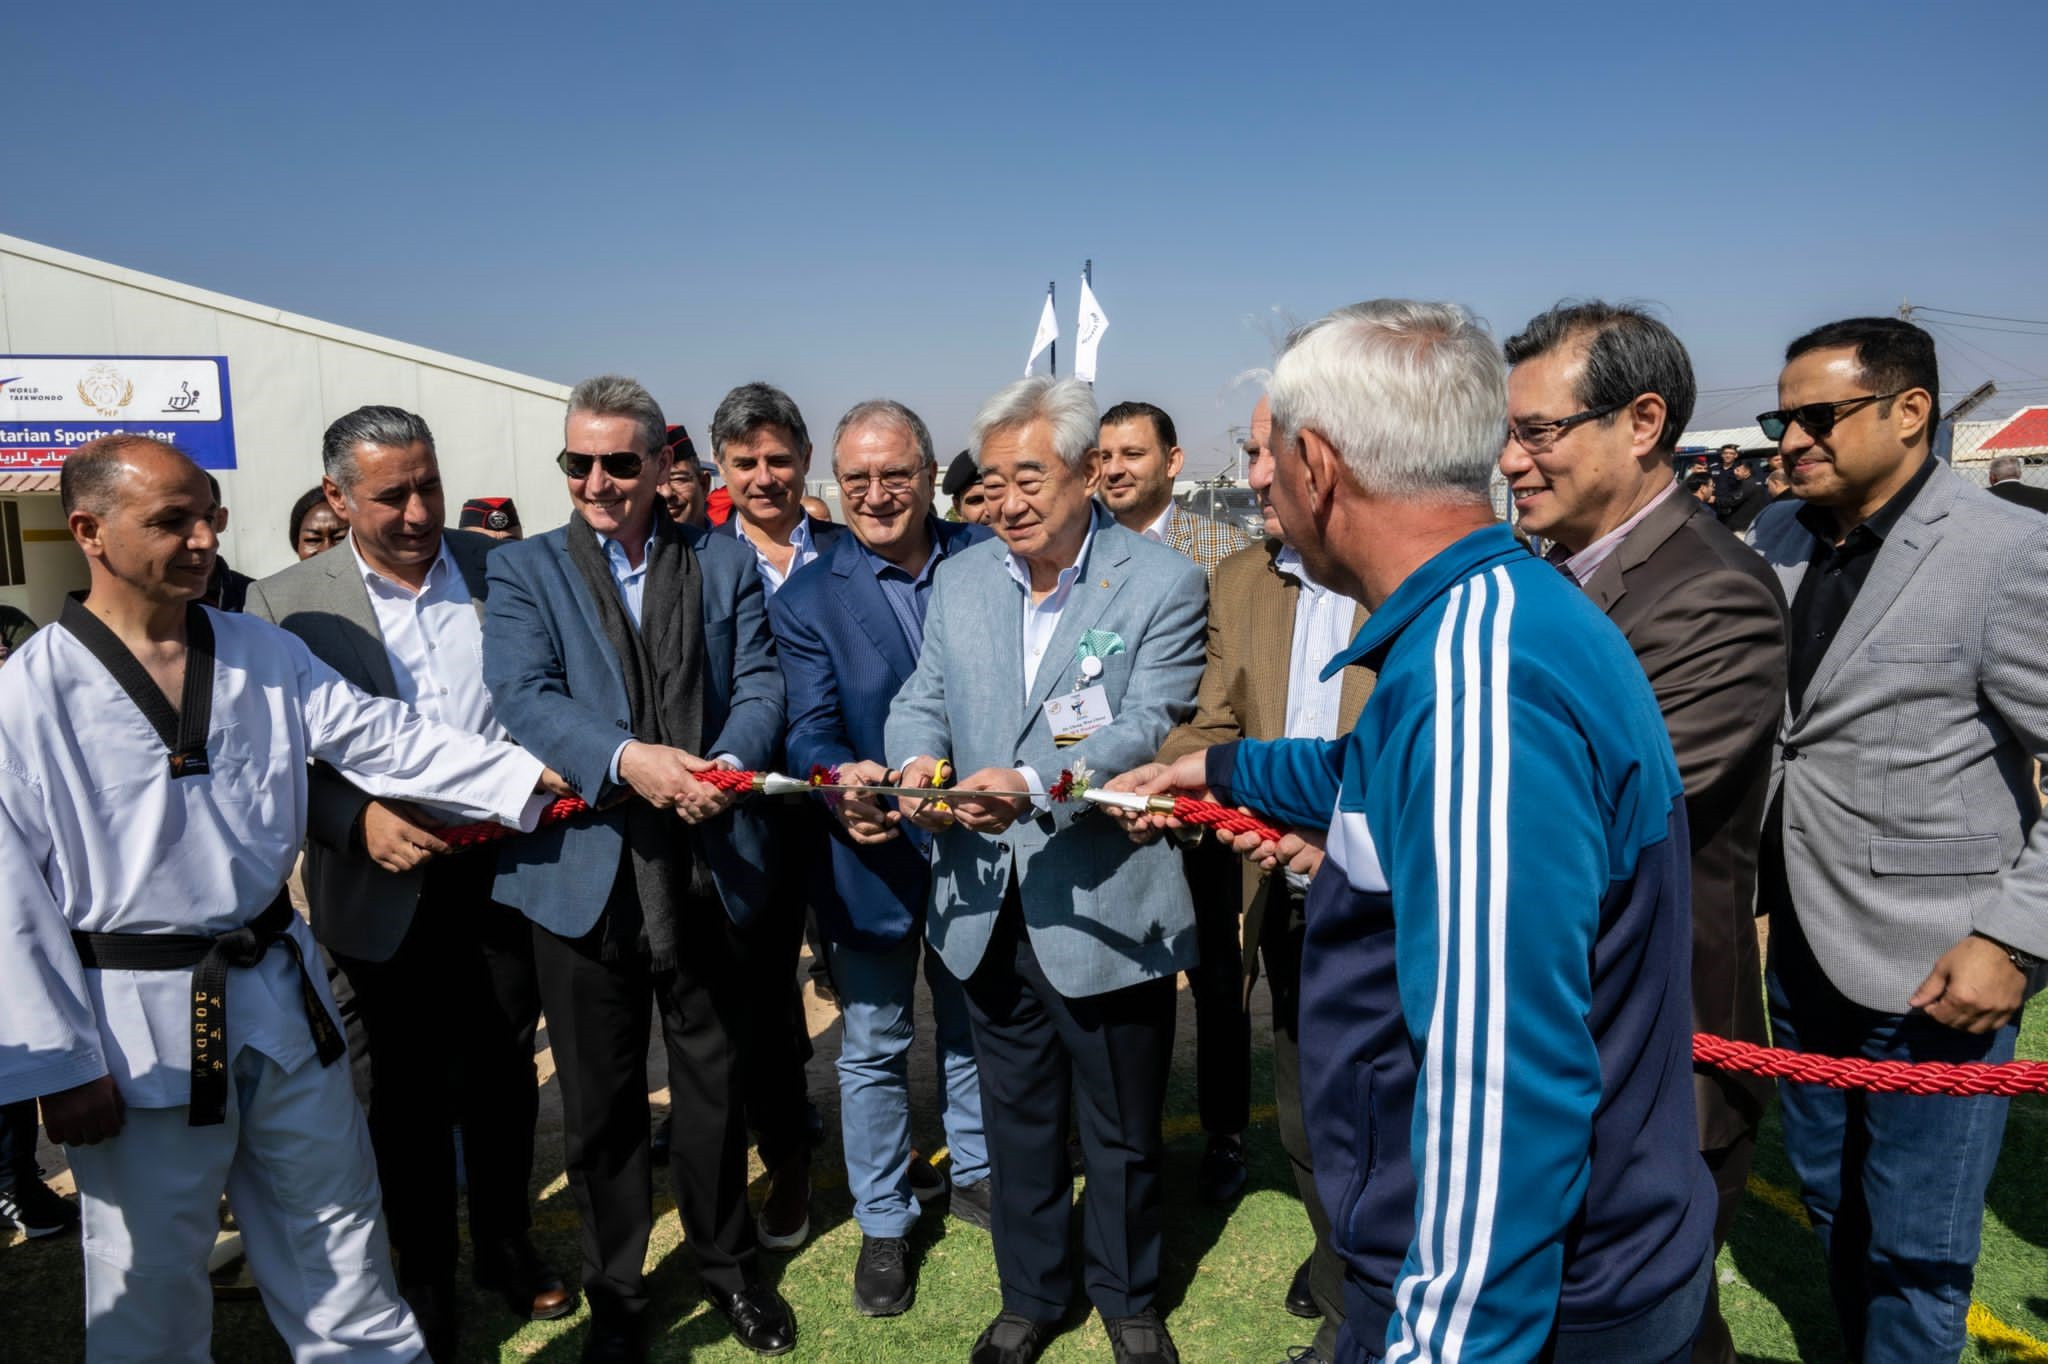 WBSC and ASOIF Presidents attend start of World Taekwondo's Hopes and Dreams Sports Festival